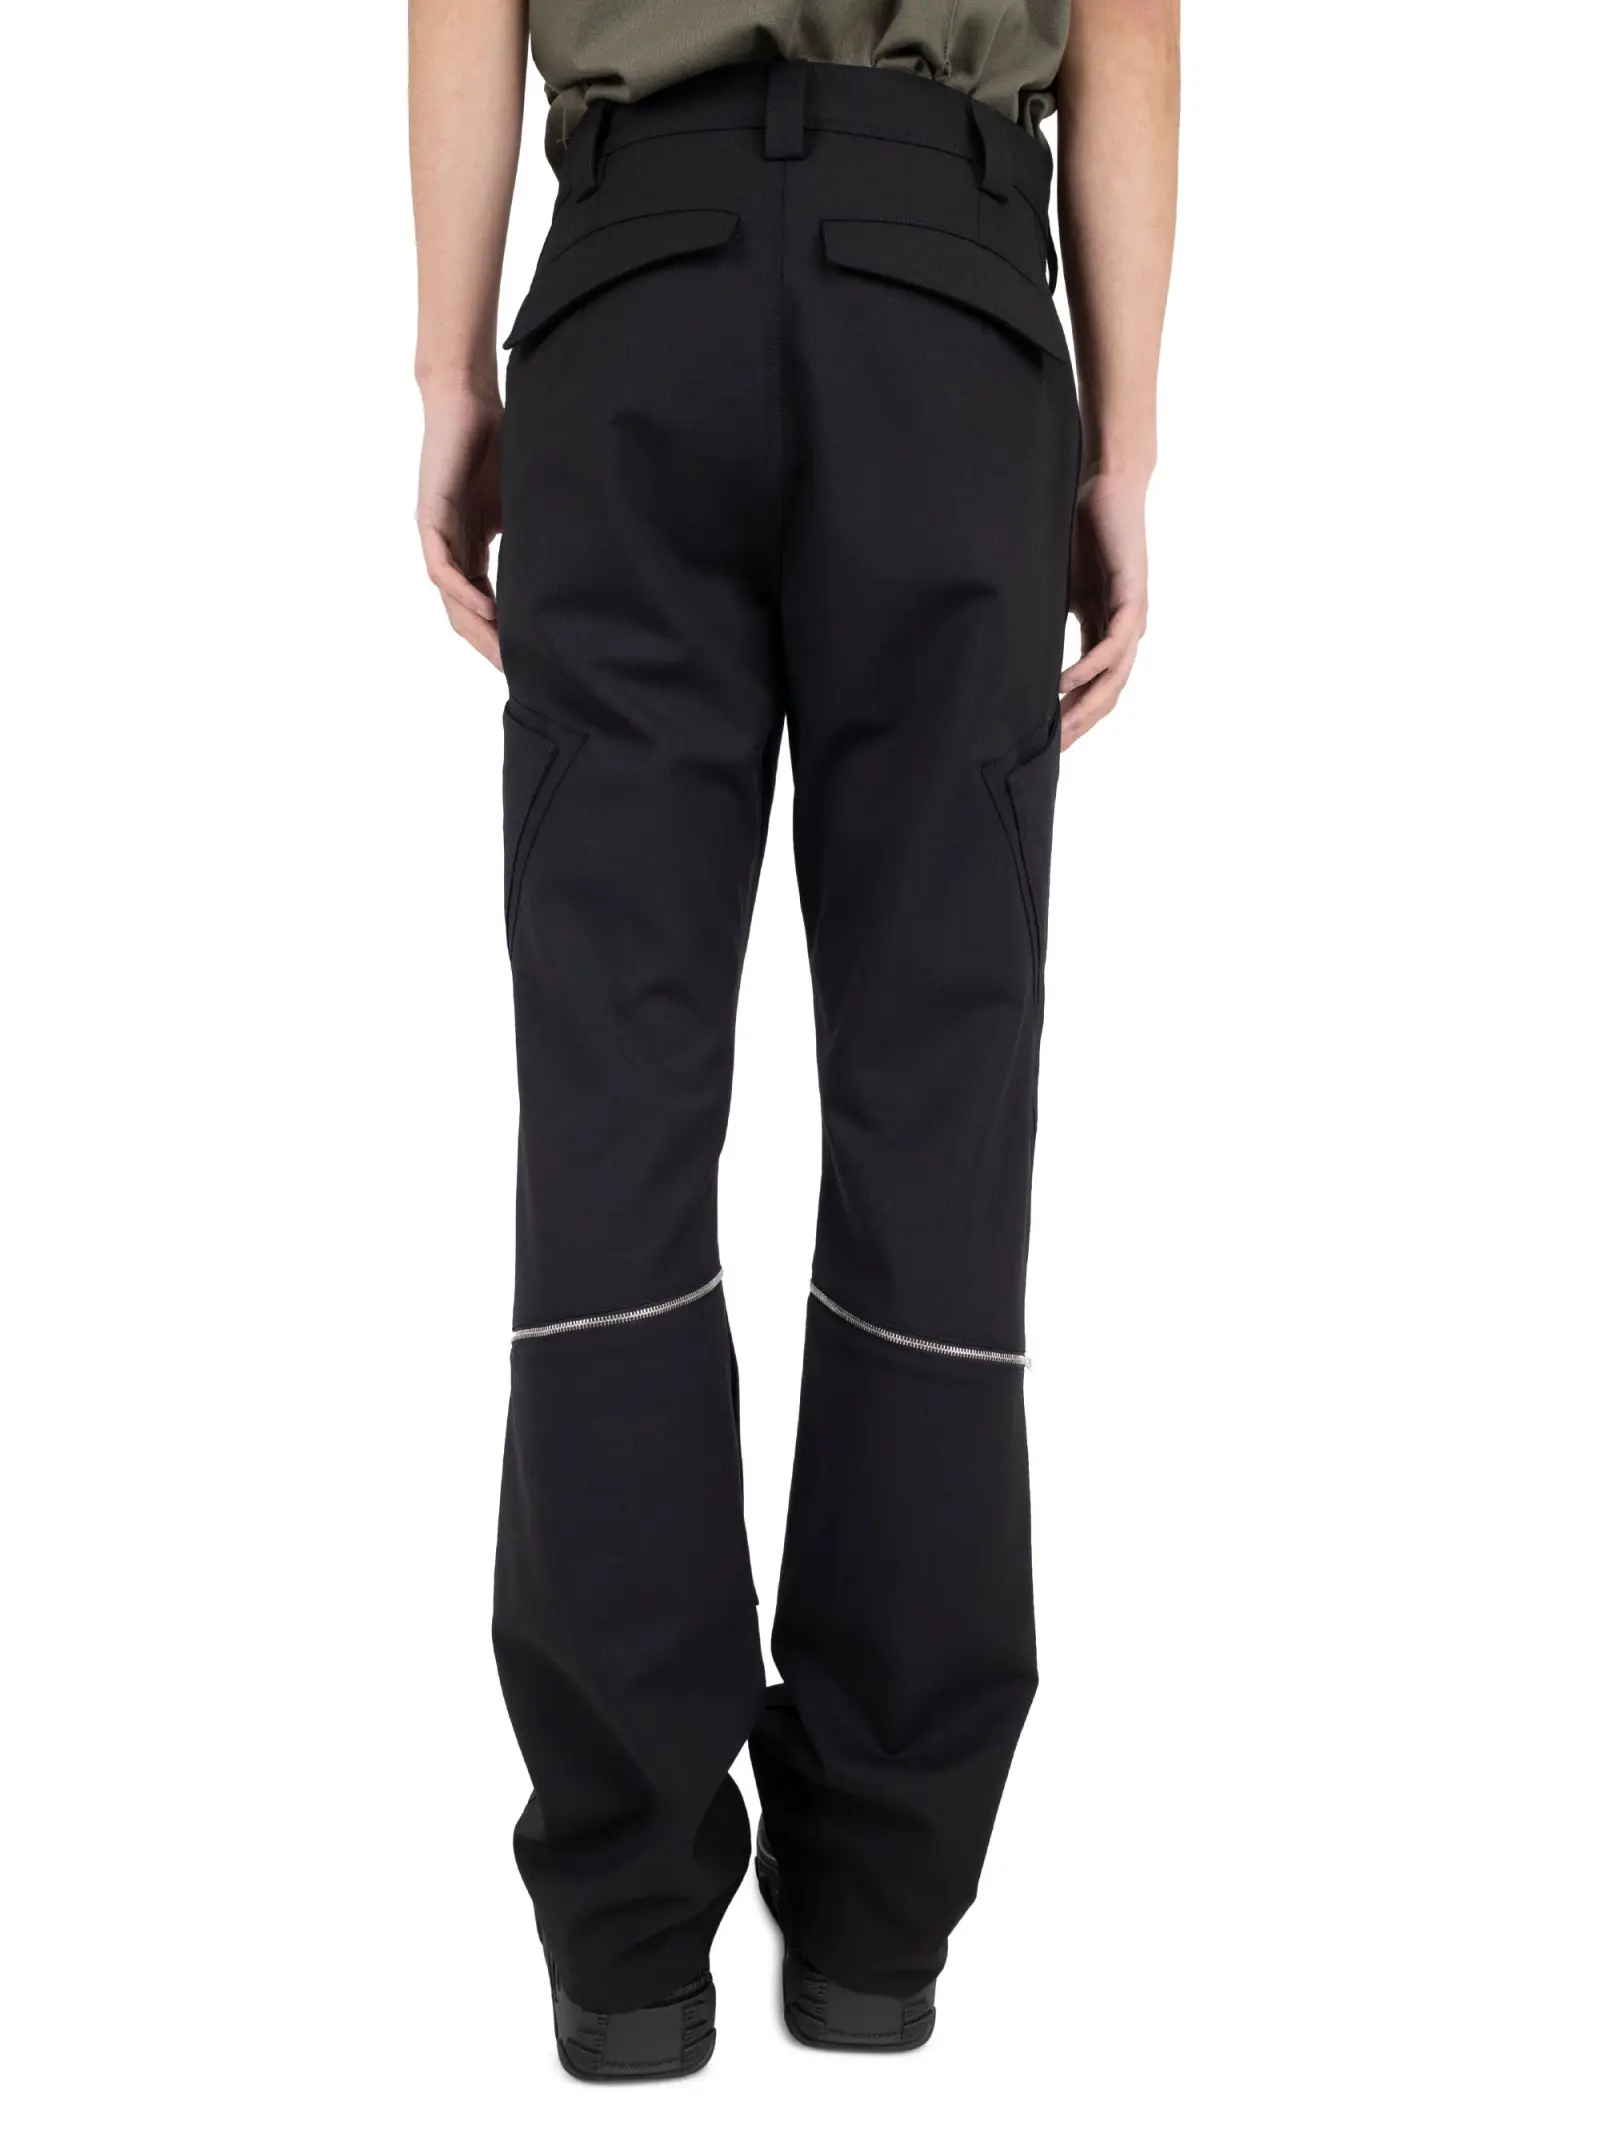 Buy Lightweight Ripstop Trousers - Black - Niton999